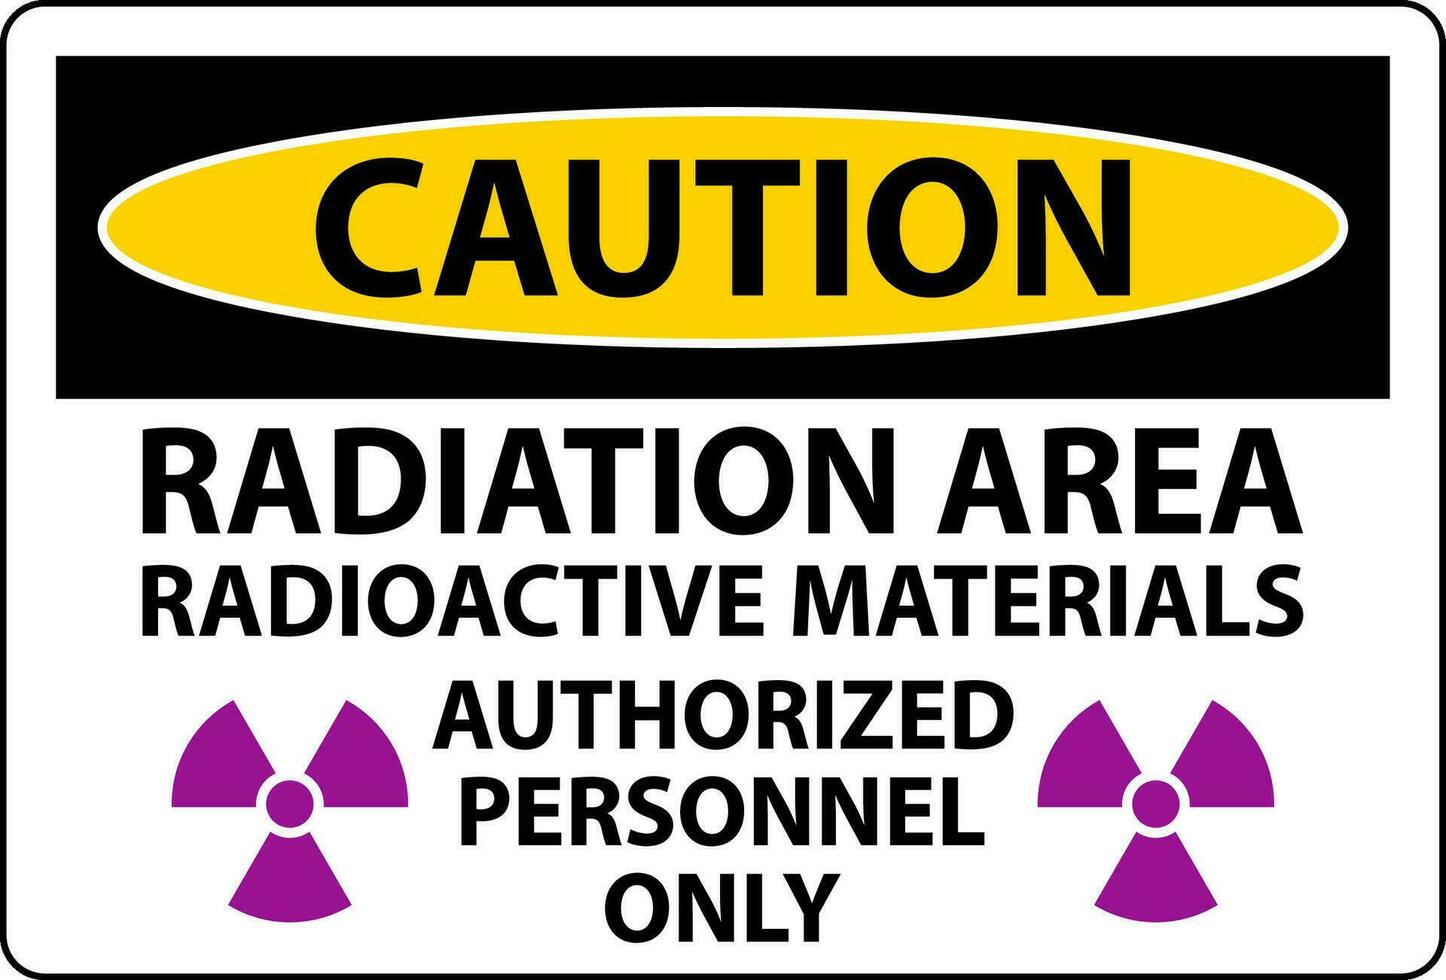 Radiation Caution Sign Caution Radiation Area, Radioactive Materials, Authorized Personnel Only vector